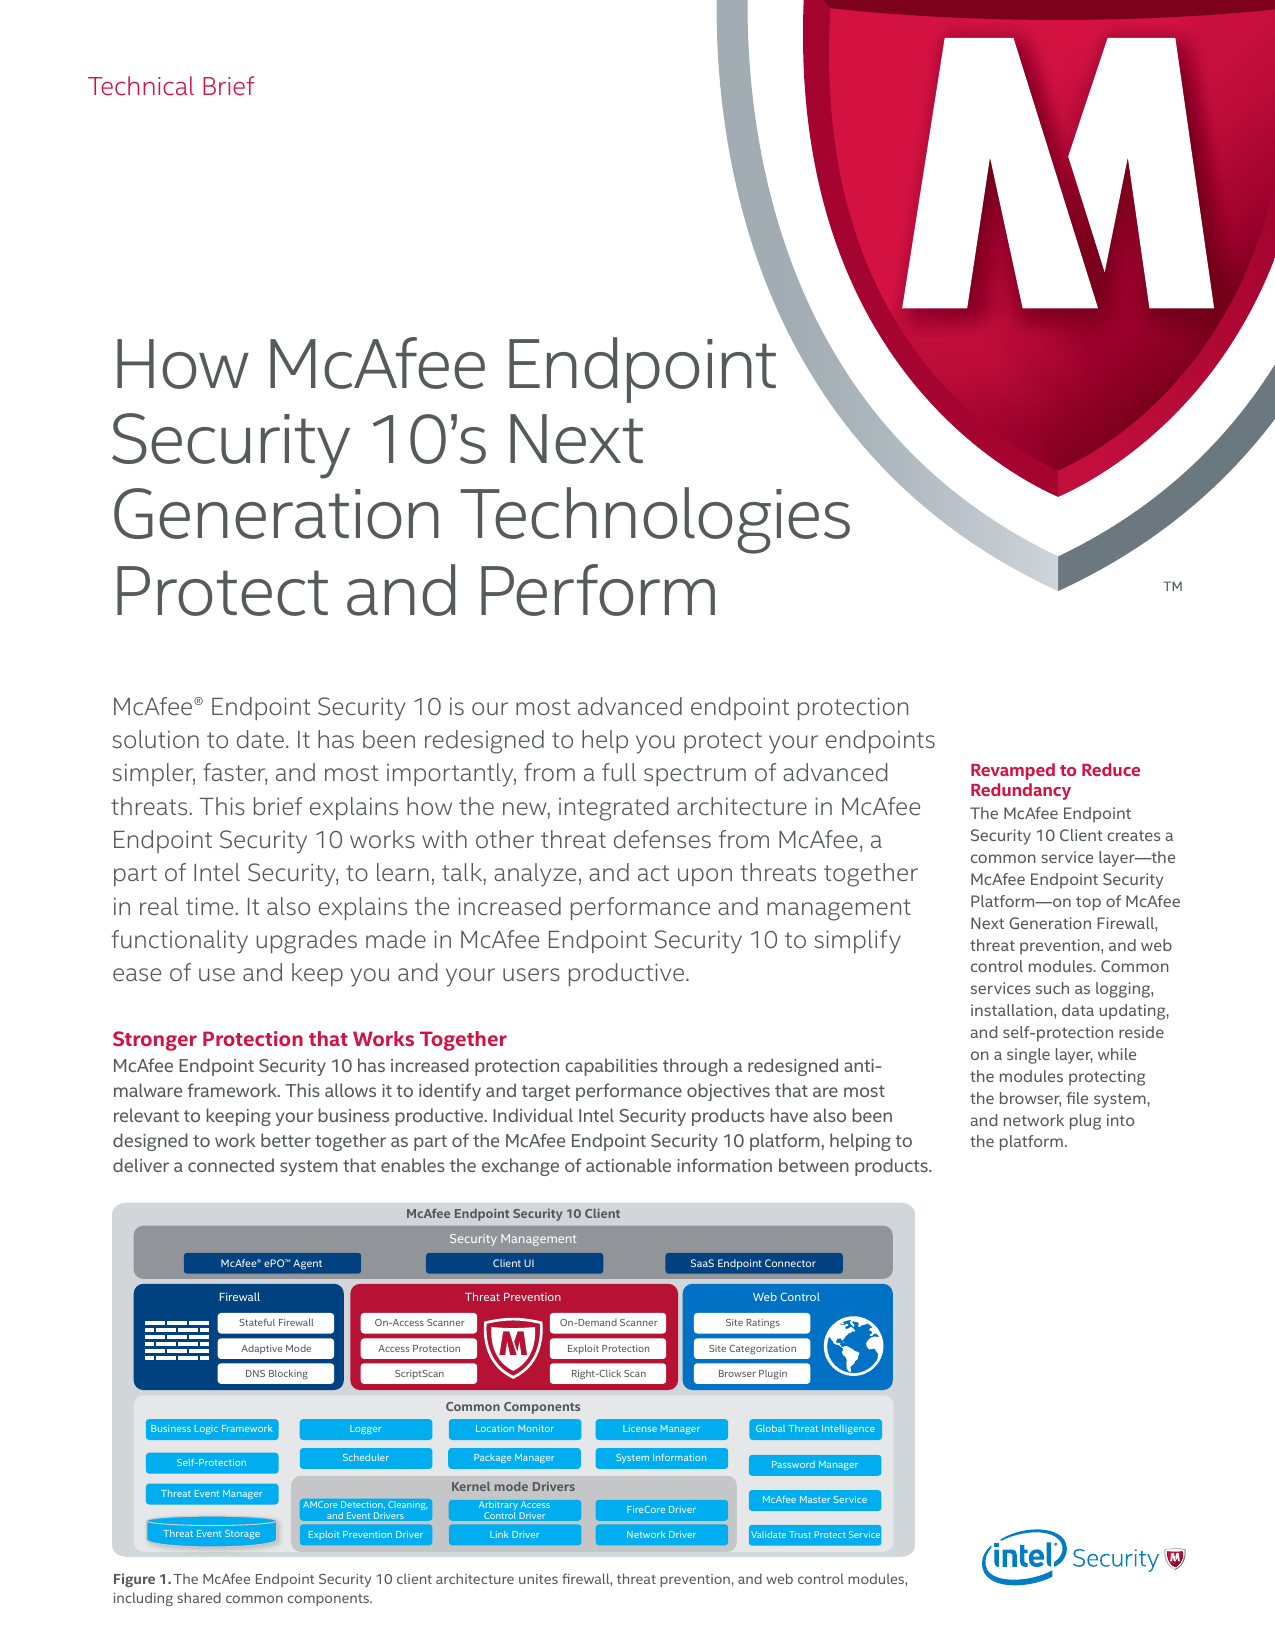 mcafee endpoint protection software authoritative sources